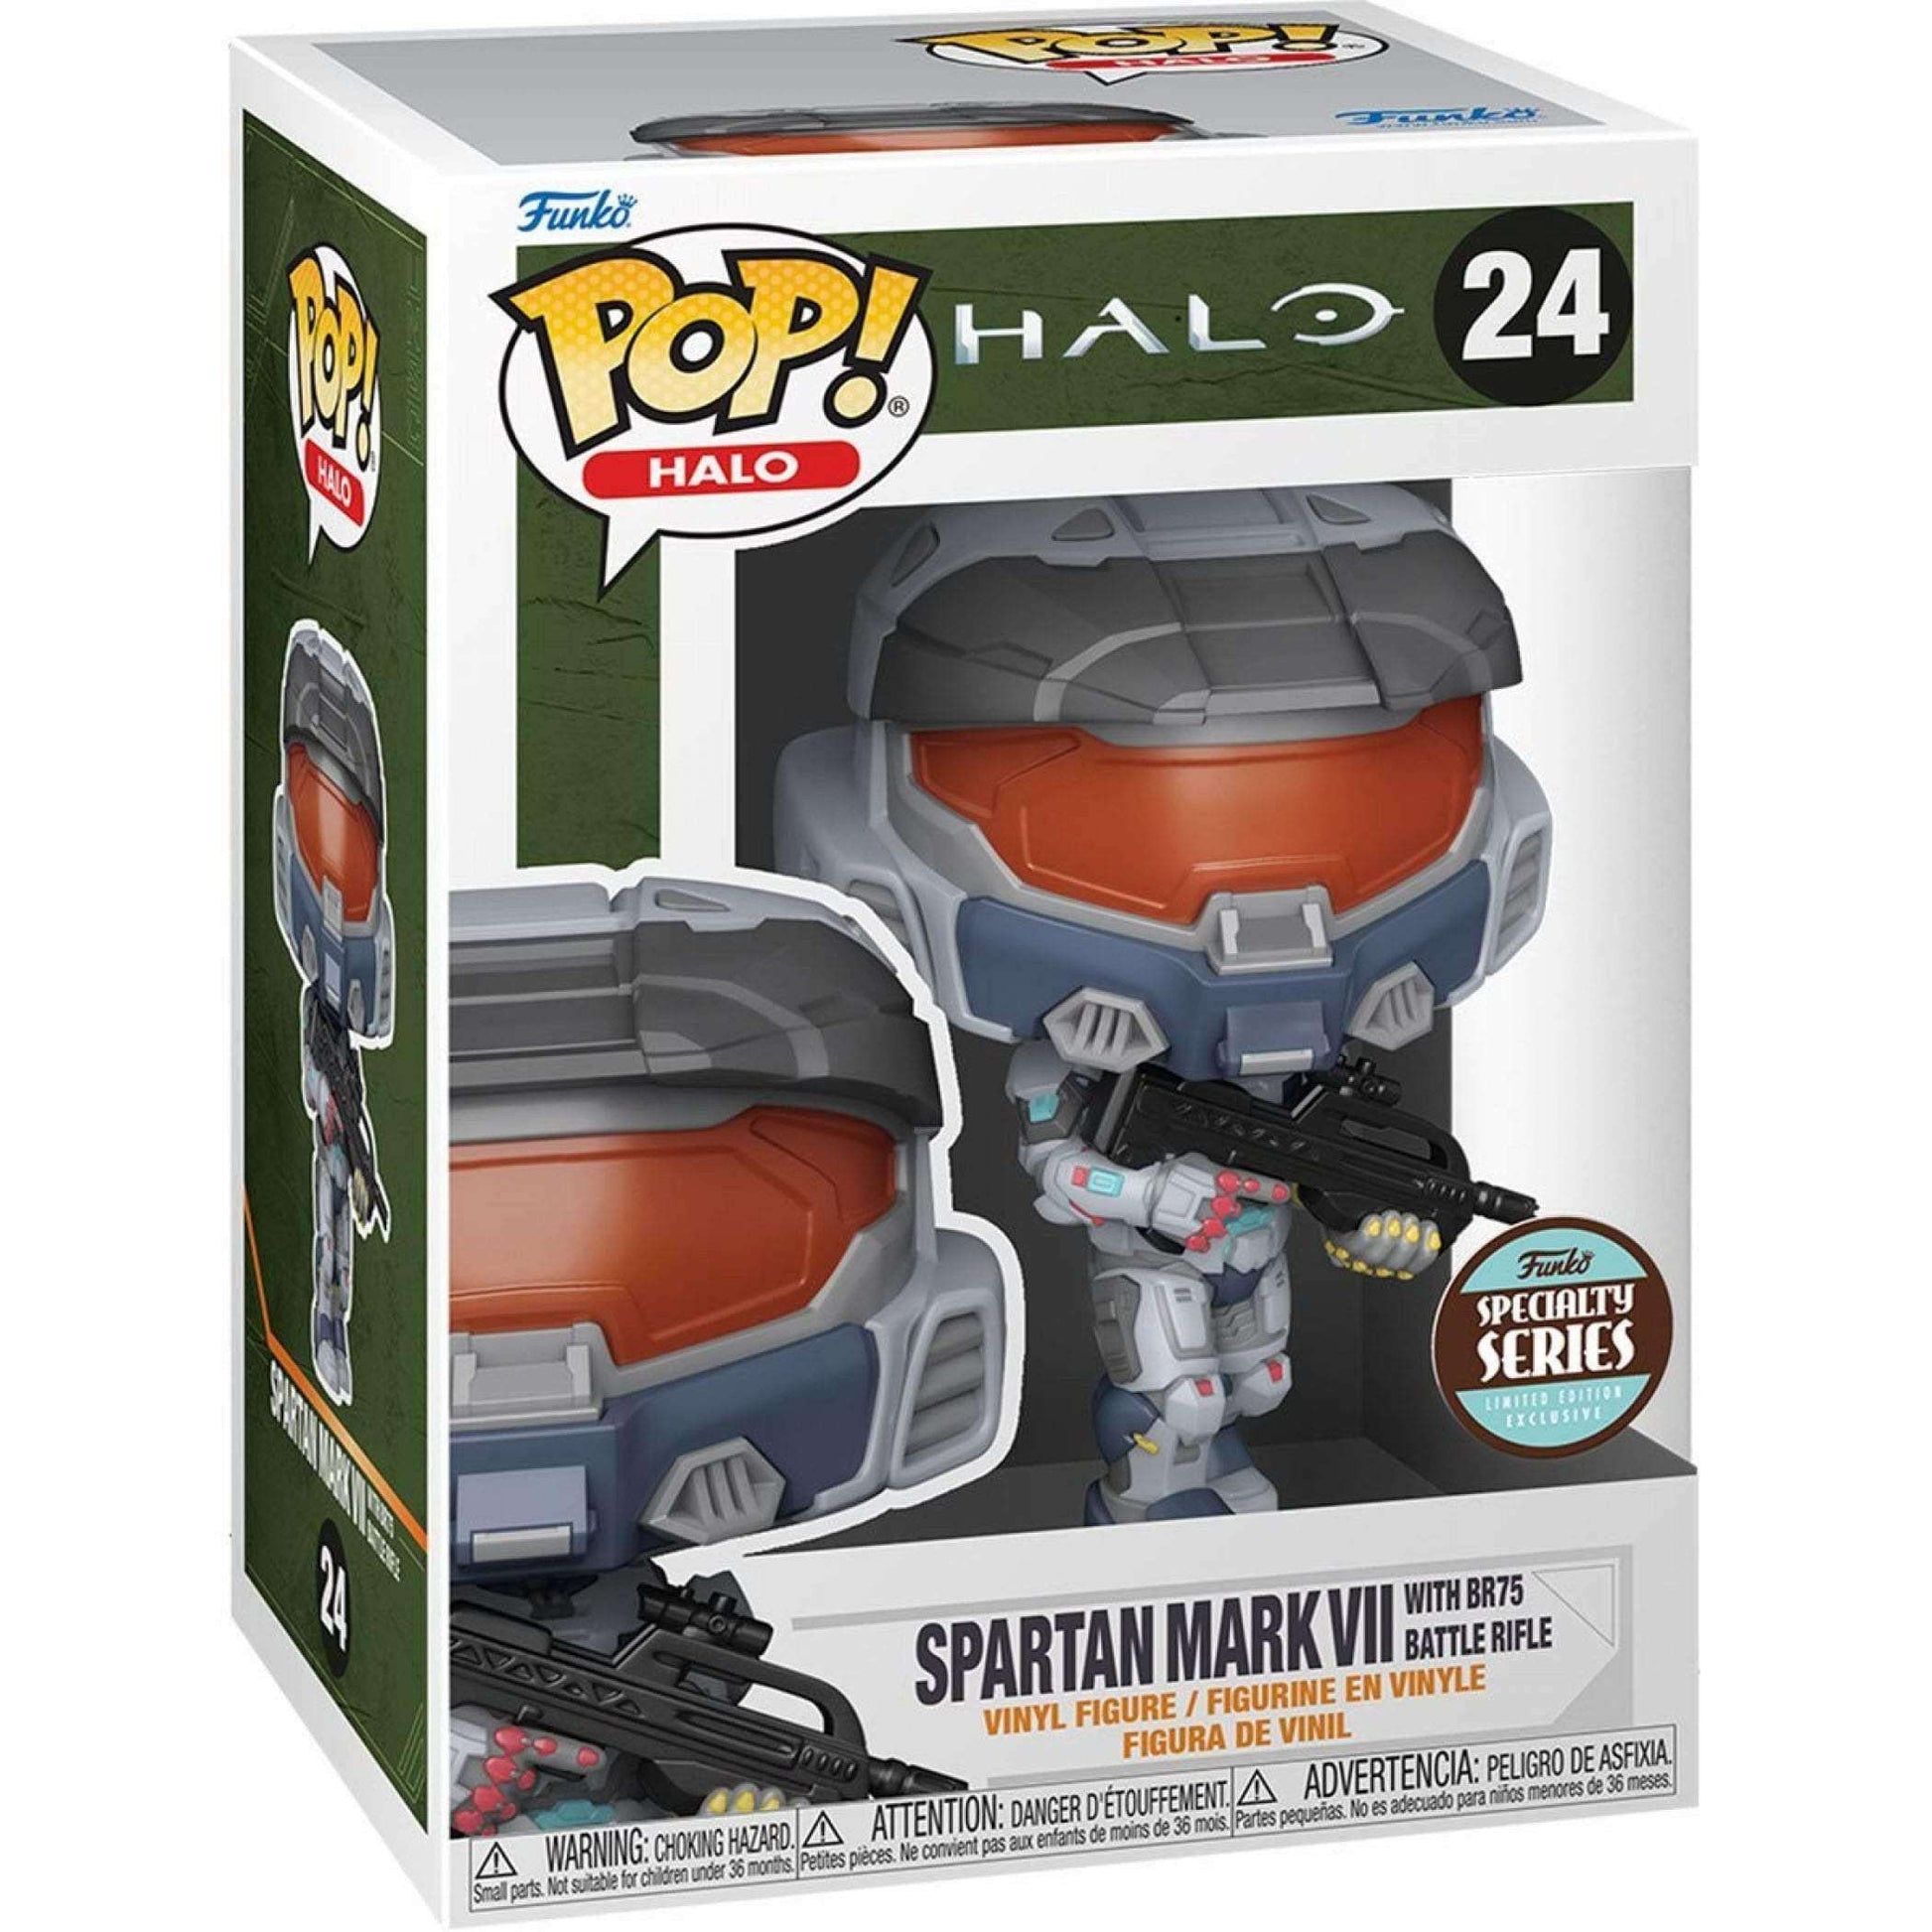 Funko Pop! Halo 24 Infinite Mark VII with BR75 Battle Rifle Specialty Series 9cm